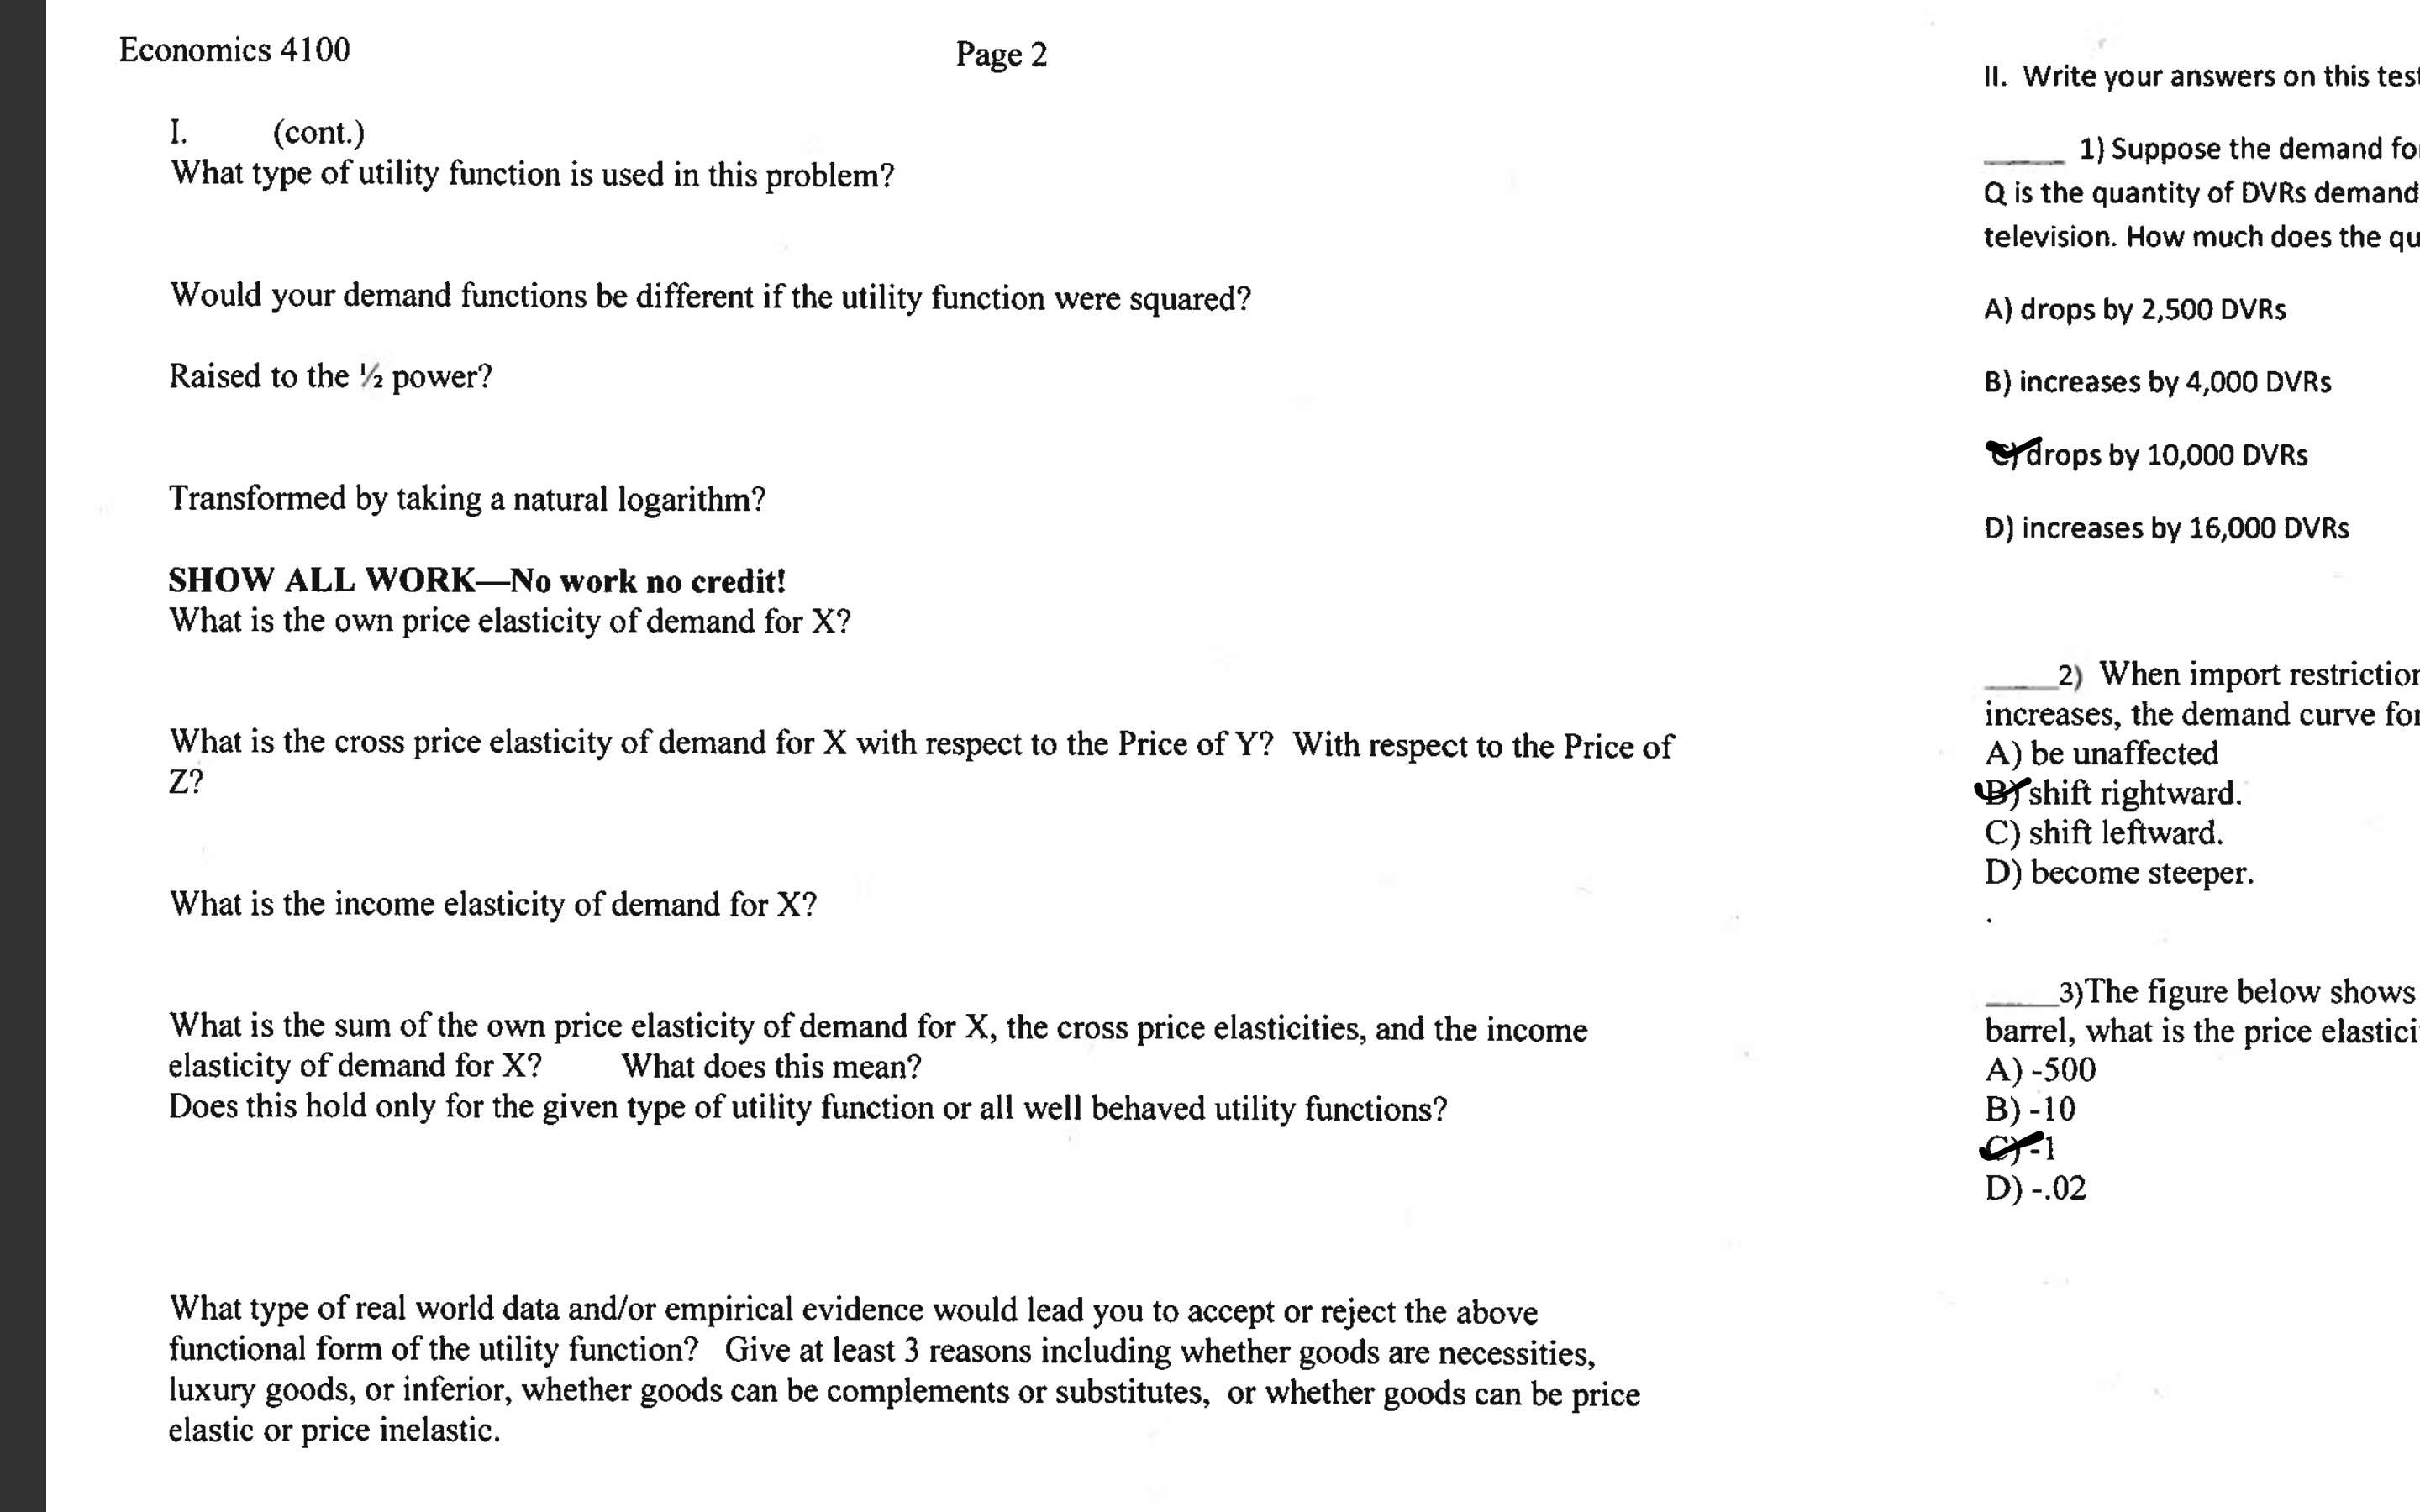 Economics 4100
Page 2
II. Write your answers on this test
I.
What type of utility function is used in this problem?
(cont.)
1) Suppose the demand for
Q is the quantity of DVRS demand
television. How much does the qu
Would your demand functions be different if the utility function were squared?
A) drops by 2,500 DVRS
Raised to the ½ power?
B) increases by 4,000 DVRS
rdrops by 10,000 DVRS
Transformed by taking a natural logarithm?
D) increases by 16,000 DVRS
SHOW ALL WORK-No work no credit!
What is the own price elasticity of demand for X?
2) When import restrictior
increases, the demand curve for
A) be unaffected
BYshift rightward.
C) shift leftward.
D) become steeper.
What is the cross price elasticity of demand for X with respect to the Price of Y? With respect to the Price of
Z?
What is the income elasticity of demand for X?
What is the sum of the own price elasticity of demand for X, the cross price elasticities, and the income
elasticity of demand for X?
Does this hold only for the given type of utility function or all well behaved utility functions?
_3)The figure below shows
barrel, what is the price elastici
A) -500
B) -10
What does this mean?
D) -.02
What type of real world data and/or empirical evidence would lead you to accept or reject the above
functional form of the utility function? Give at least 3 reasons including whether goods are necessities,
luxury goods, or inferior, whether goods can be complements or substitutes, or whether goods can be price
elastic or price inelastic.
